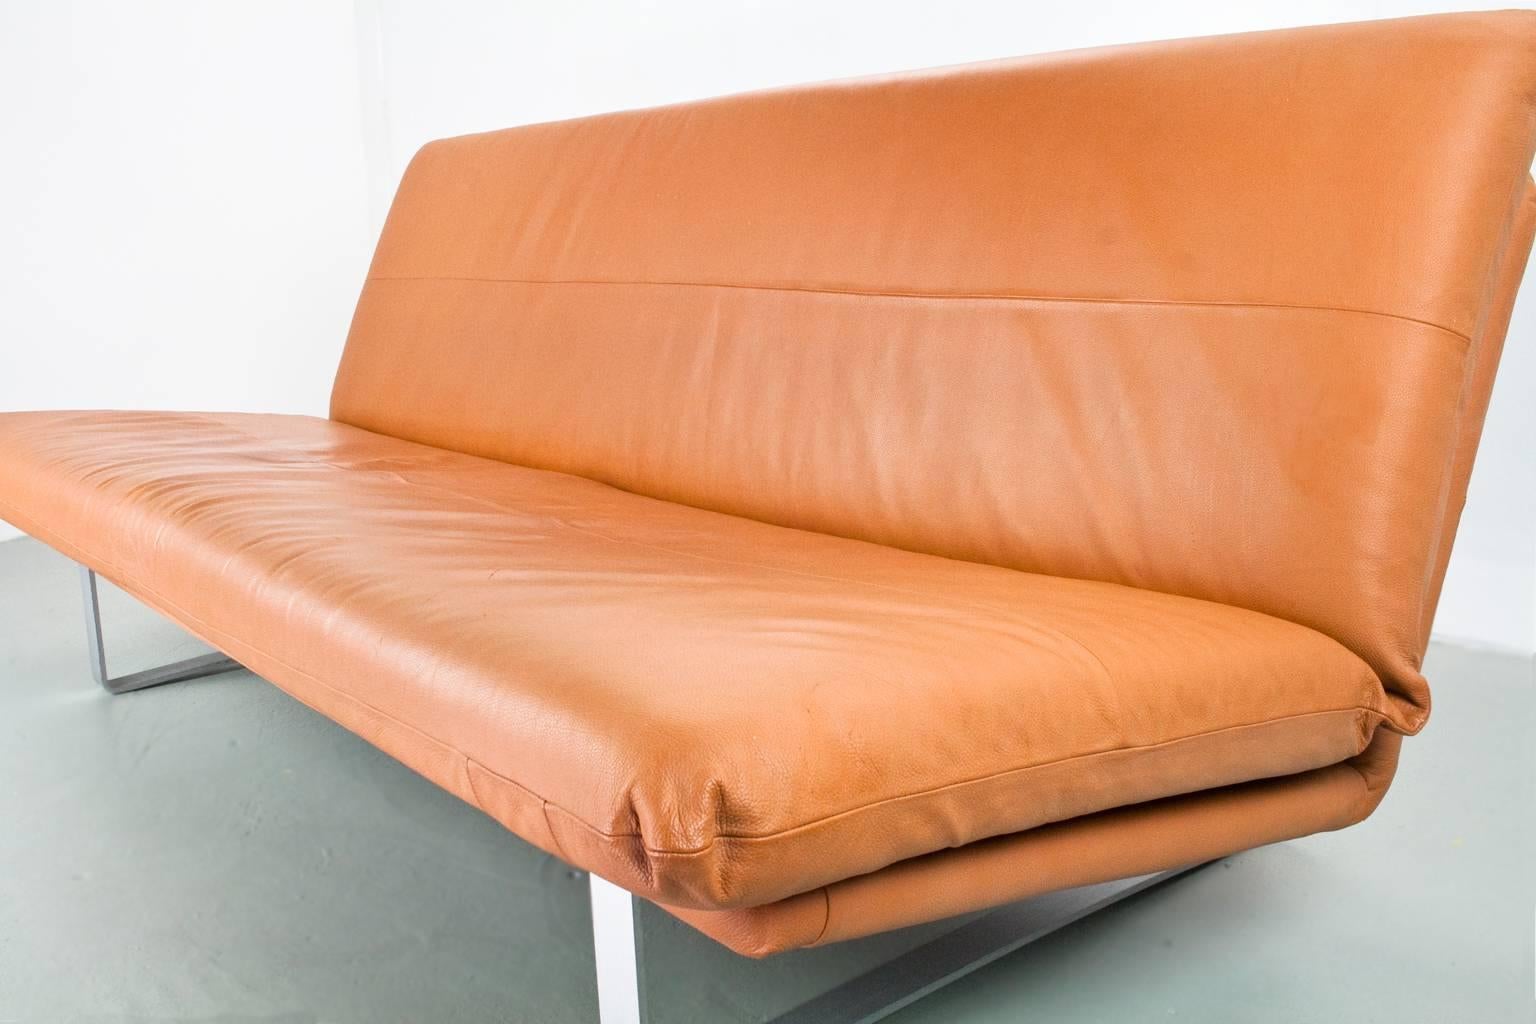 Three-seat sofa, model C683 designed by Kho Liang Ie for Artifort, the Netherlands, 1968. This sofa is re-upholstered in recent years with a cognac colored high quality leather. Grey metal legs.

Ask us about specific shipping costs to your